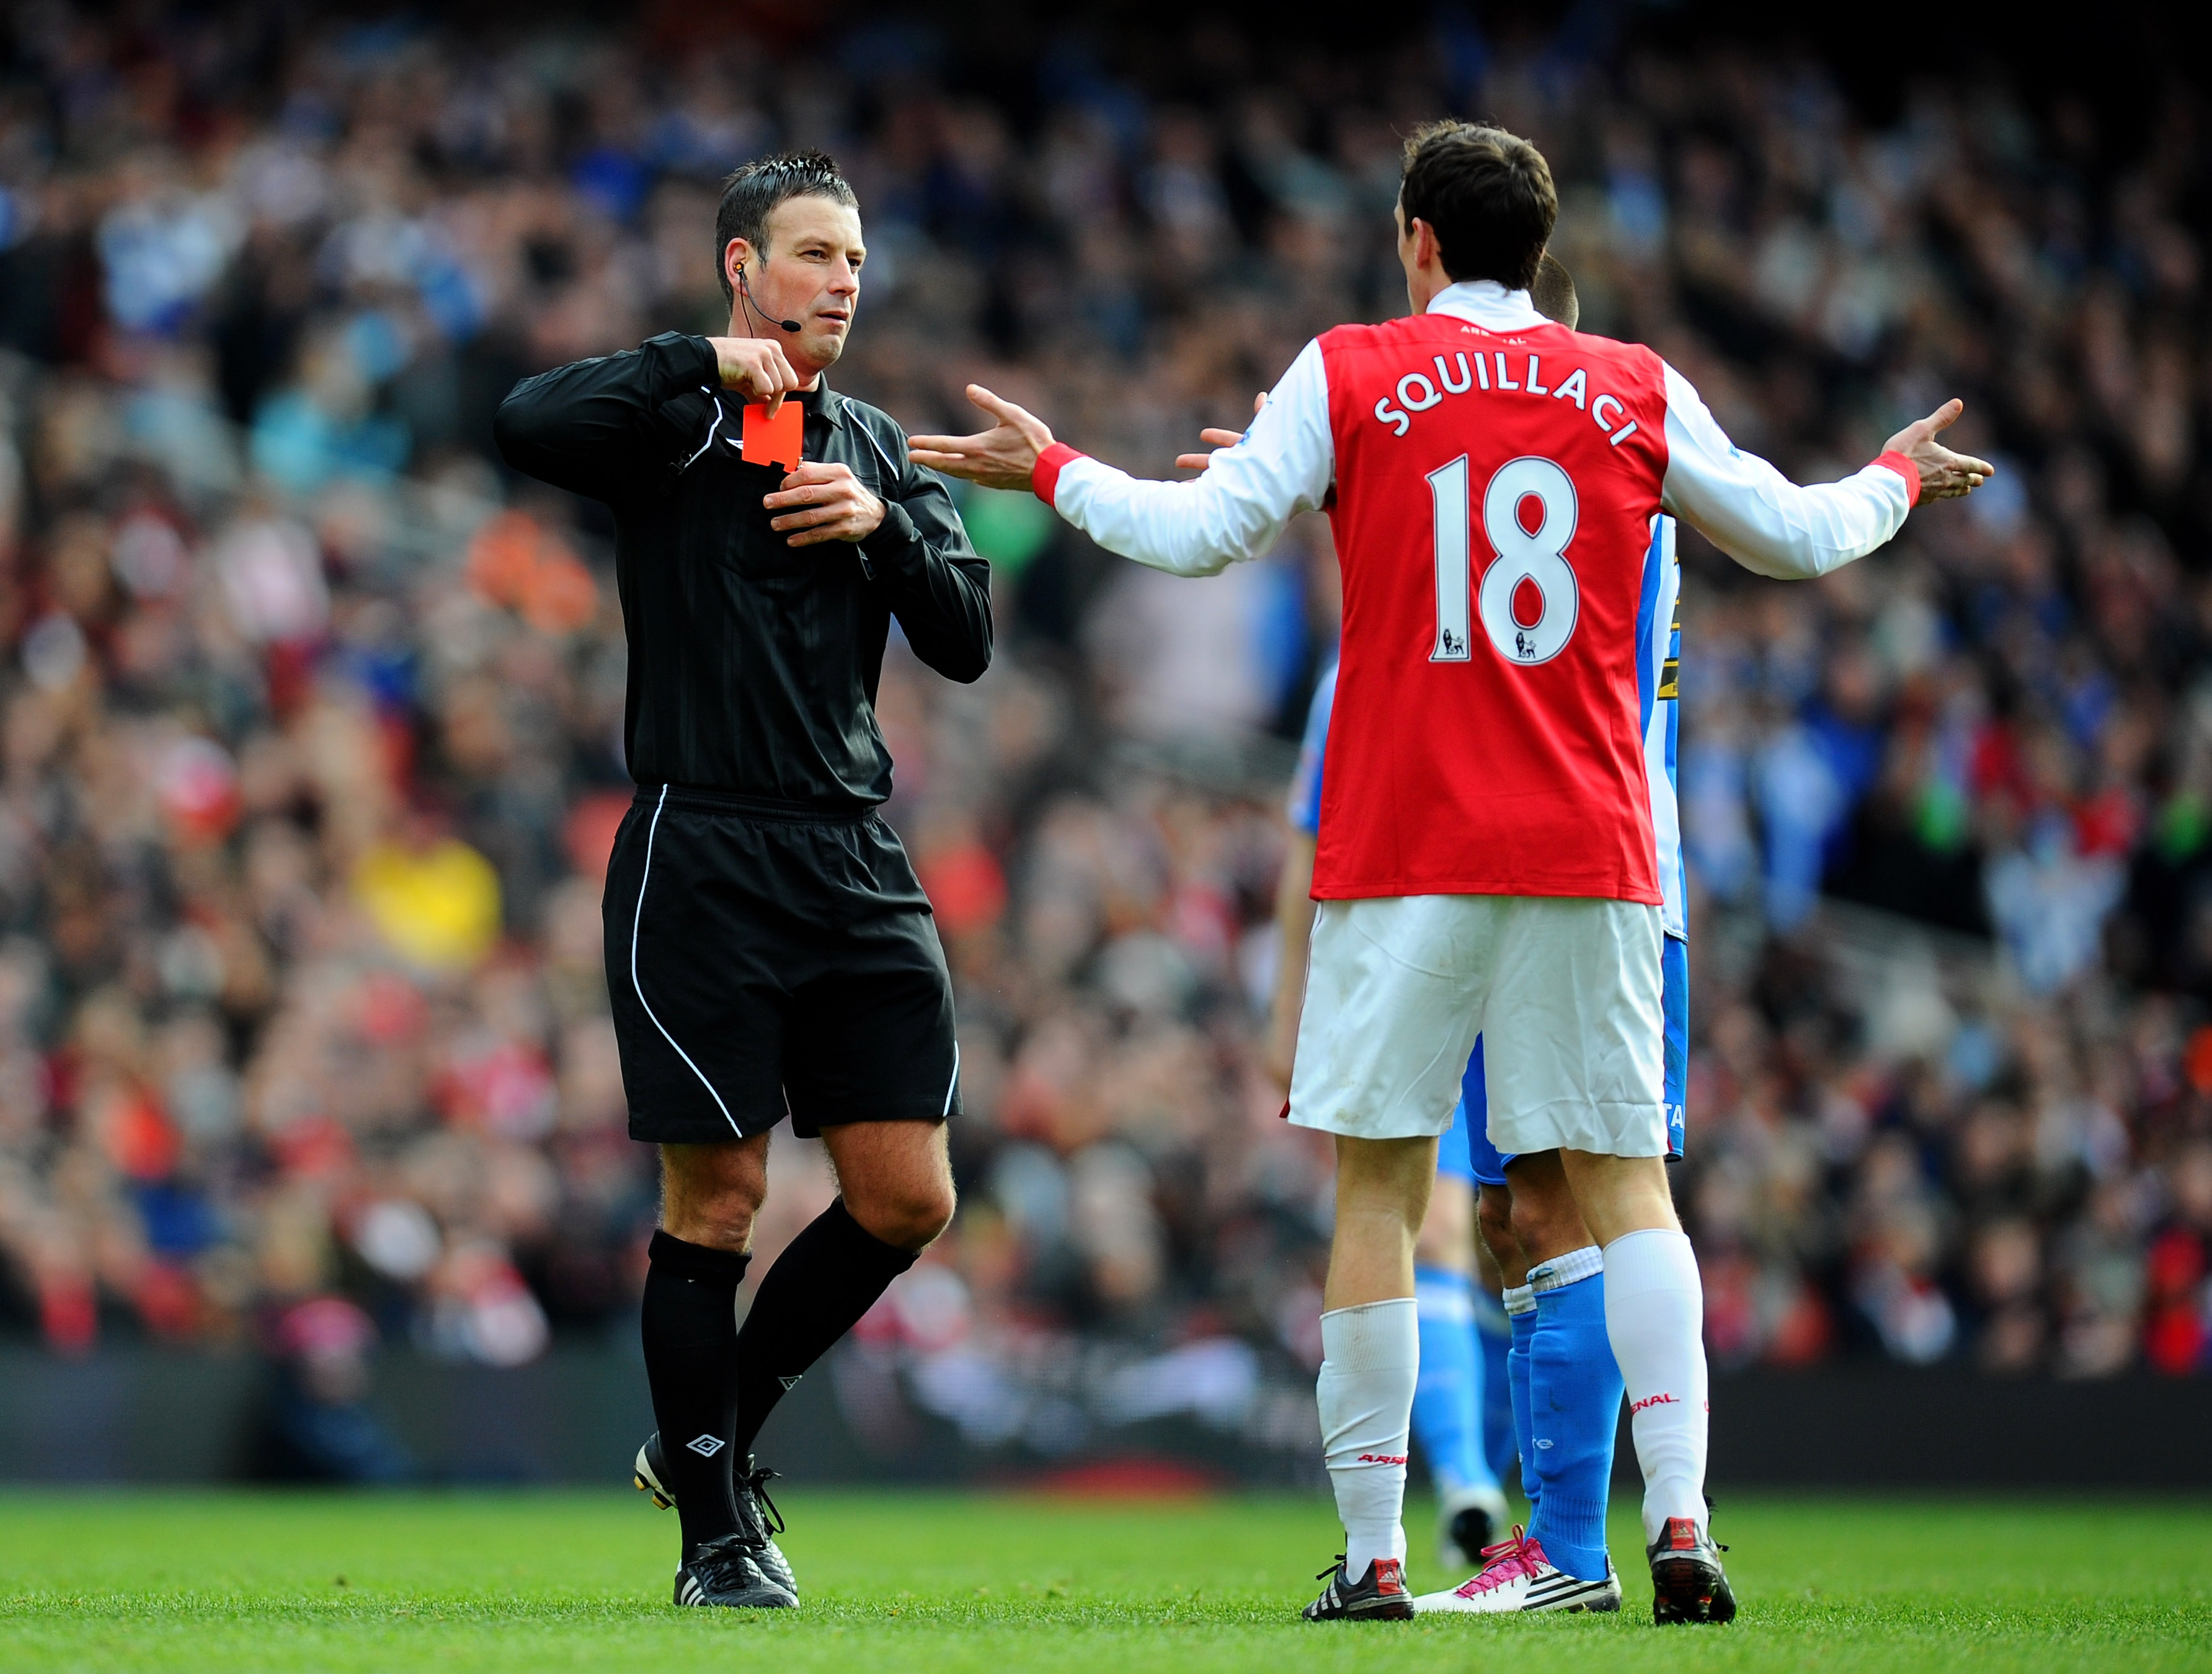 LONDON, ENGLAND - JANUARY 30:  Sebastien Squillaci #30 of Arsenal reacts as he is shown a straight red card by Referee Mark Clattenburg after his foul on Jack Hunt of Huddersfield during the FA Cup sponsored by E.ON fourth round match between Arsenal and